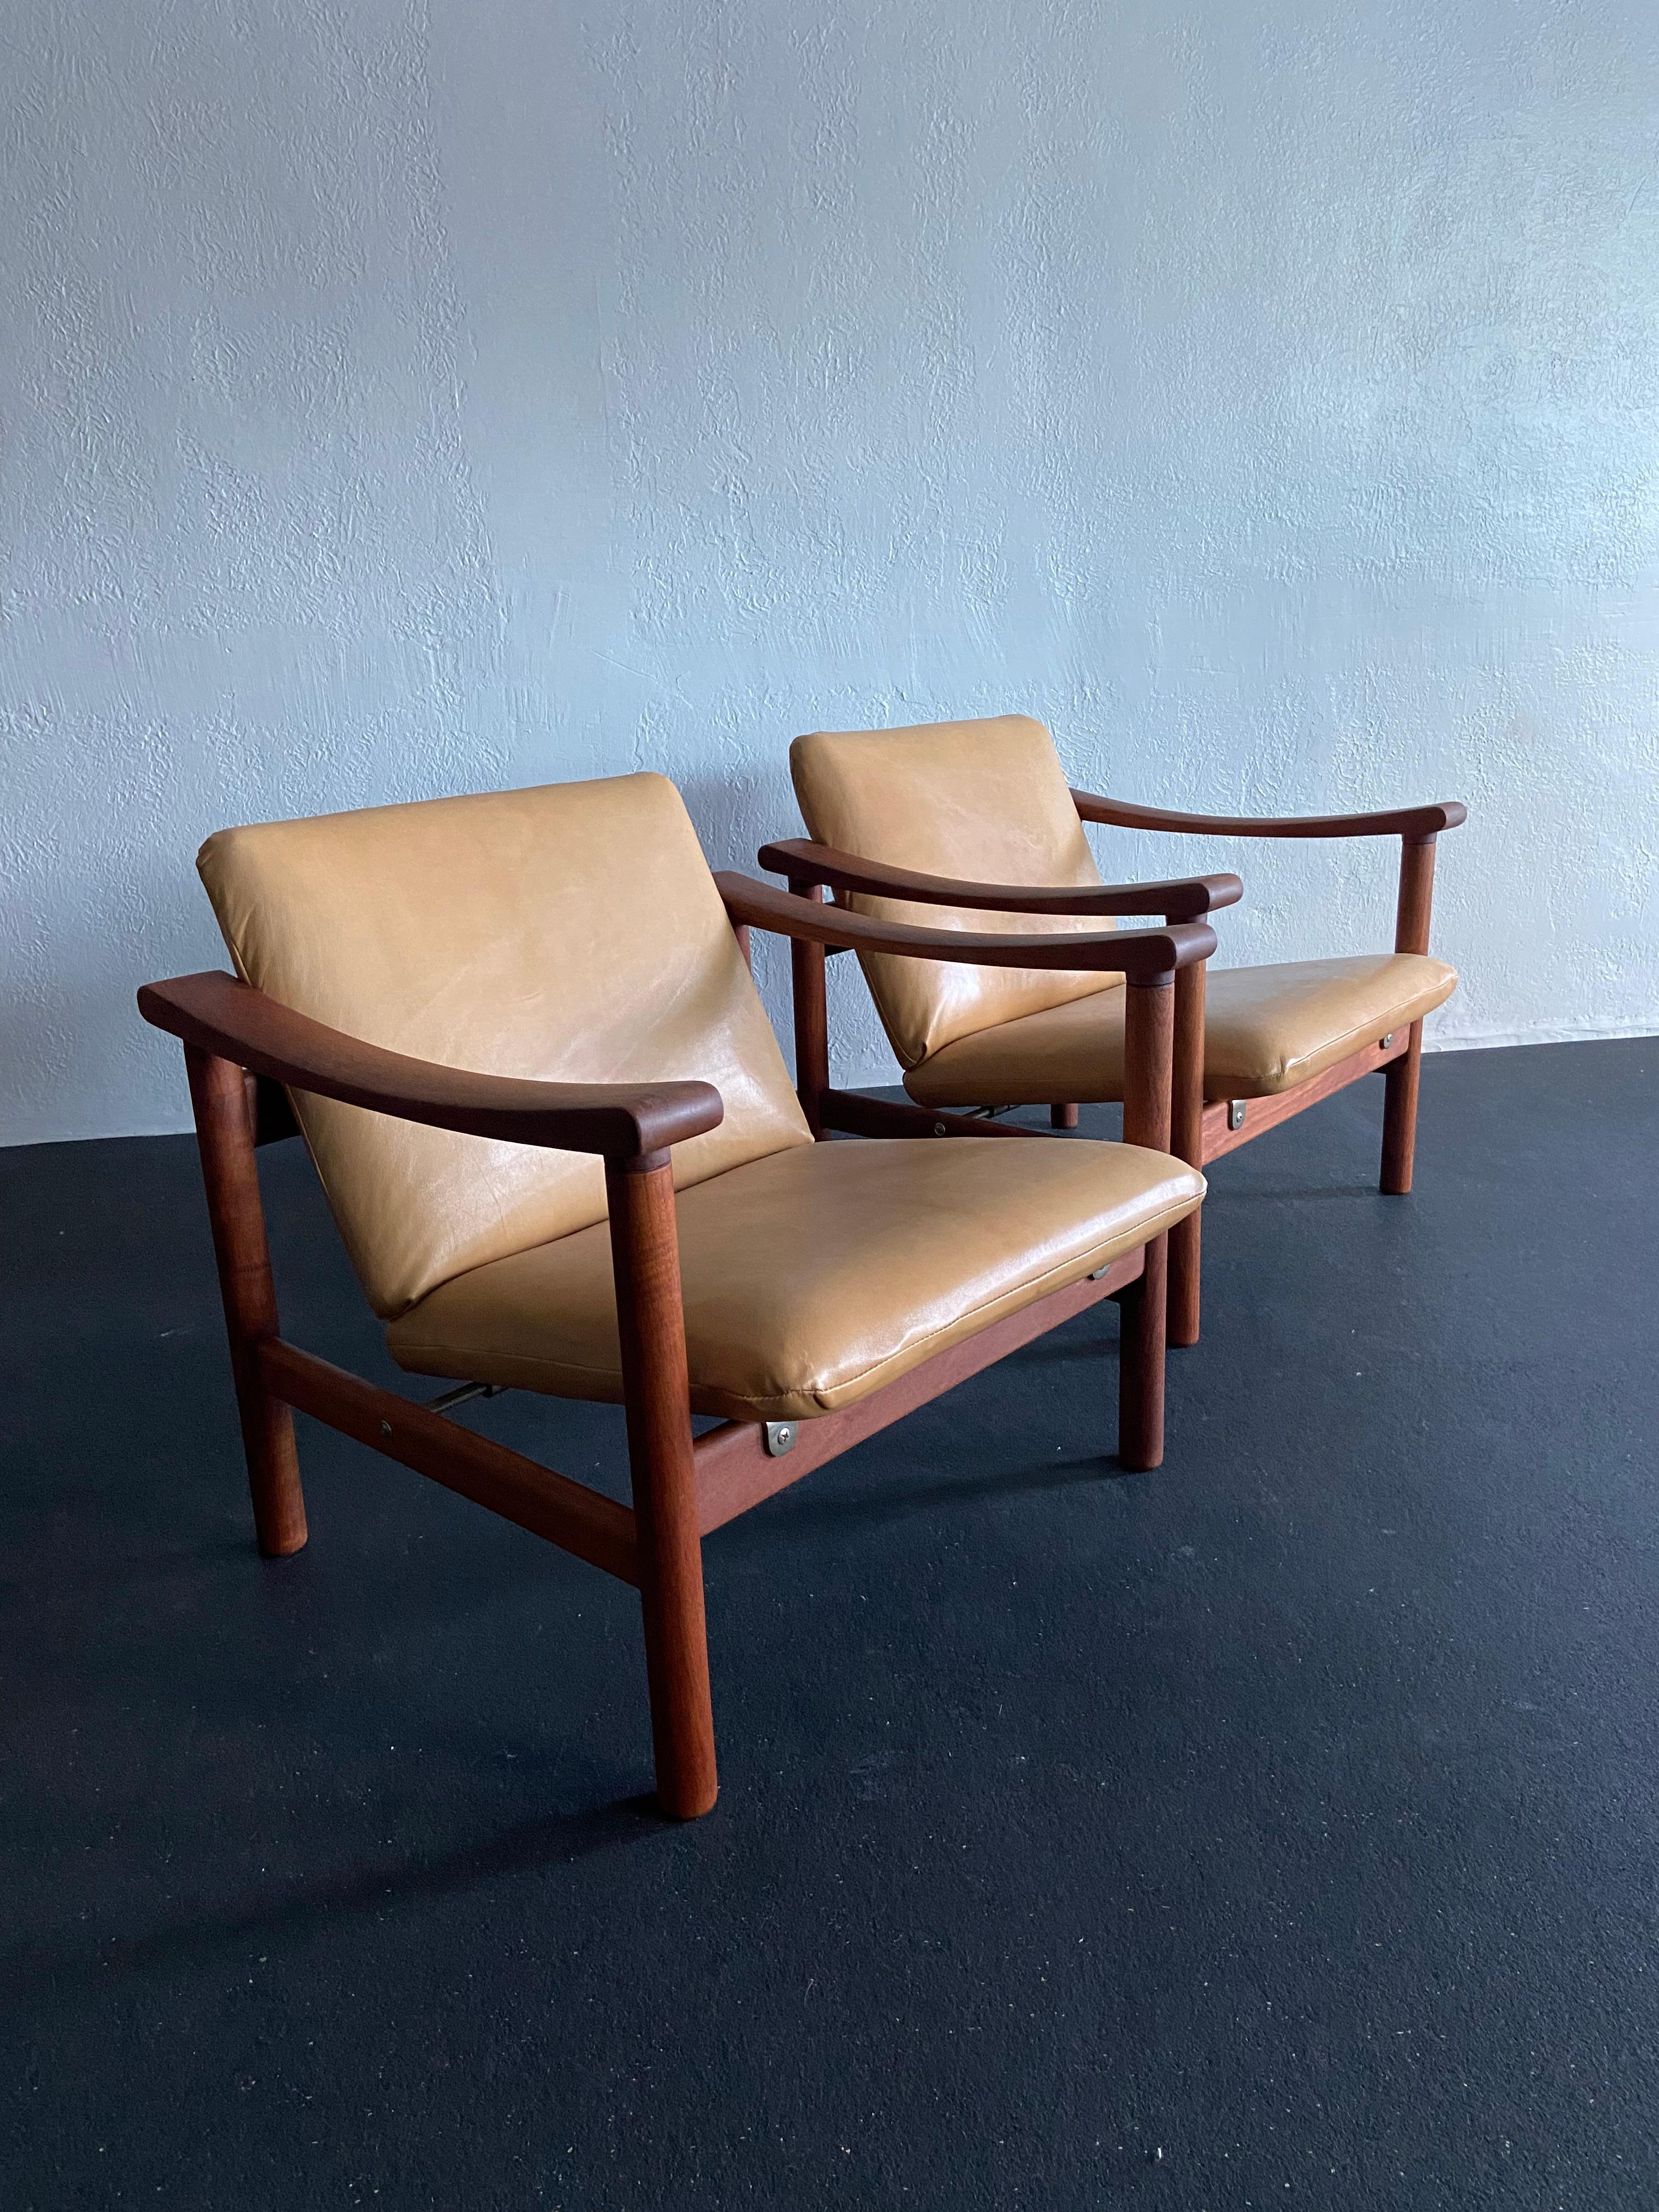 Hans Wegner for Getama Leather Lounge Chairs - a Pair For Sale 2